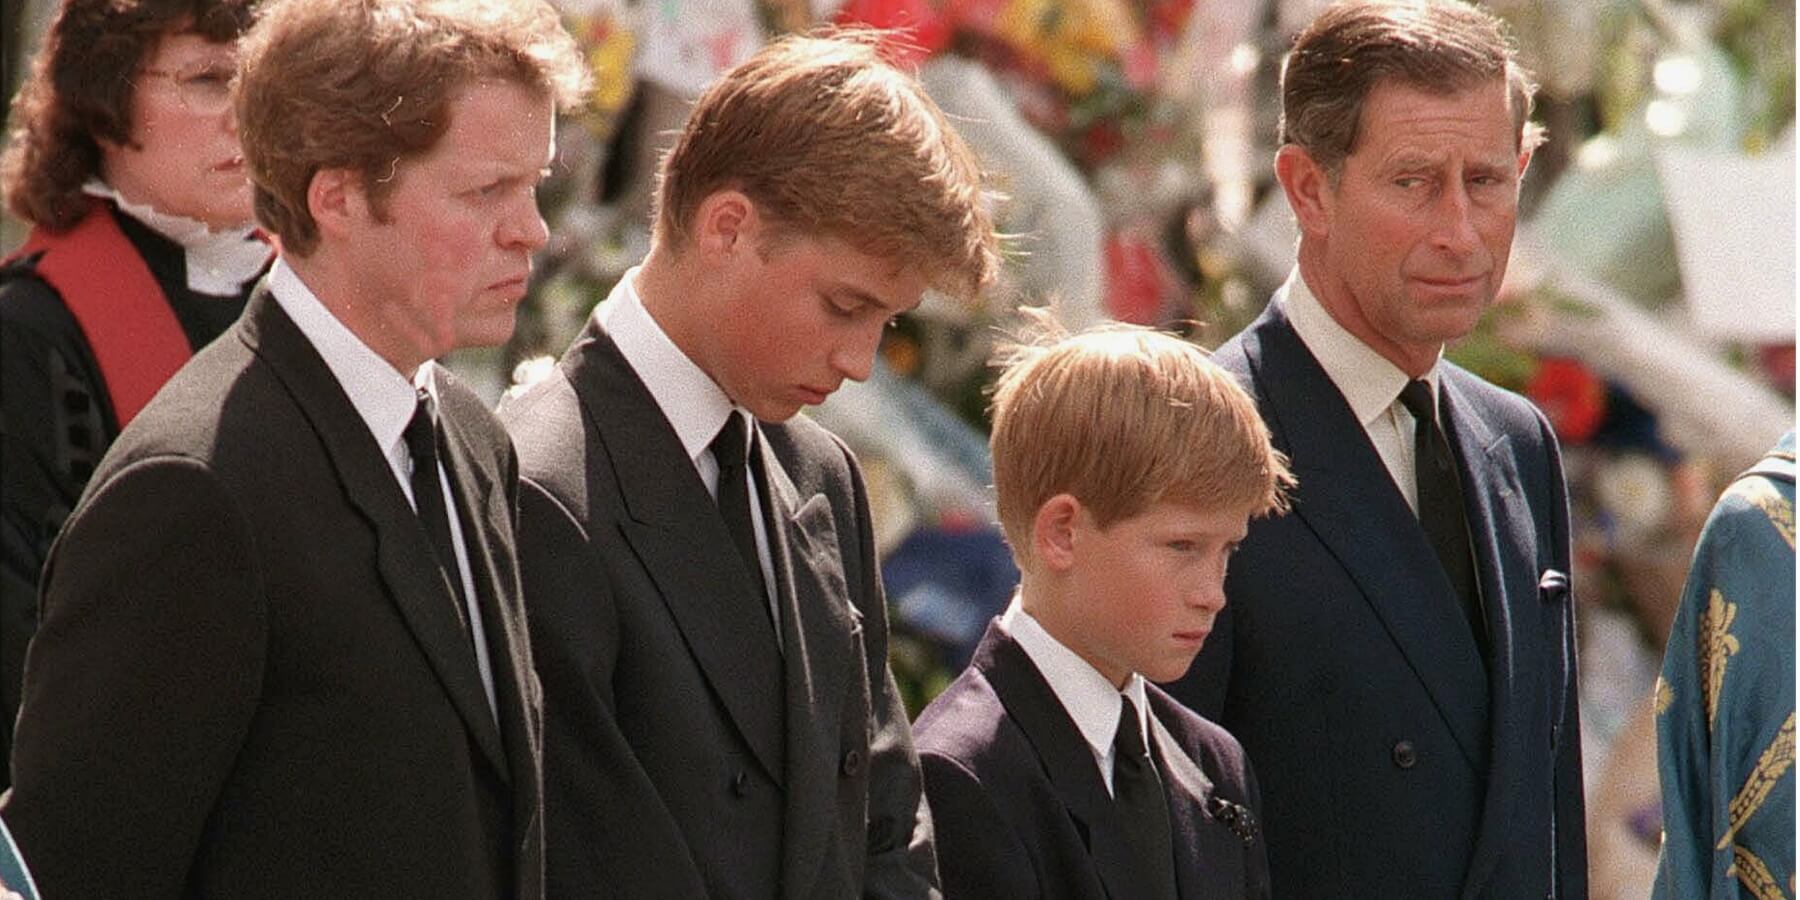 Charles Spencer, Prince William, Prince Harry and then Prince Charles at Princess Diana's funeral in 1997